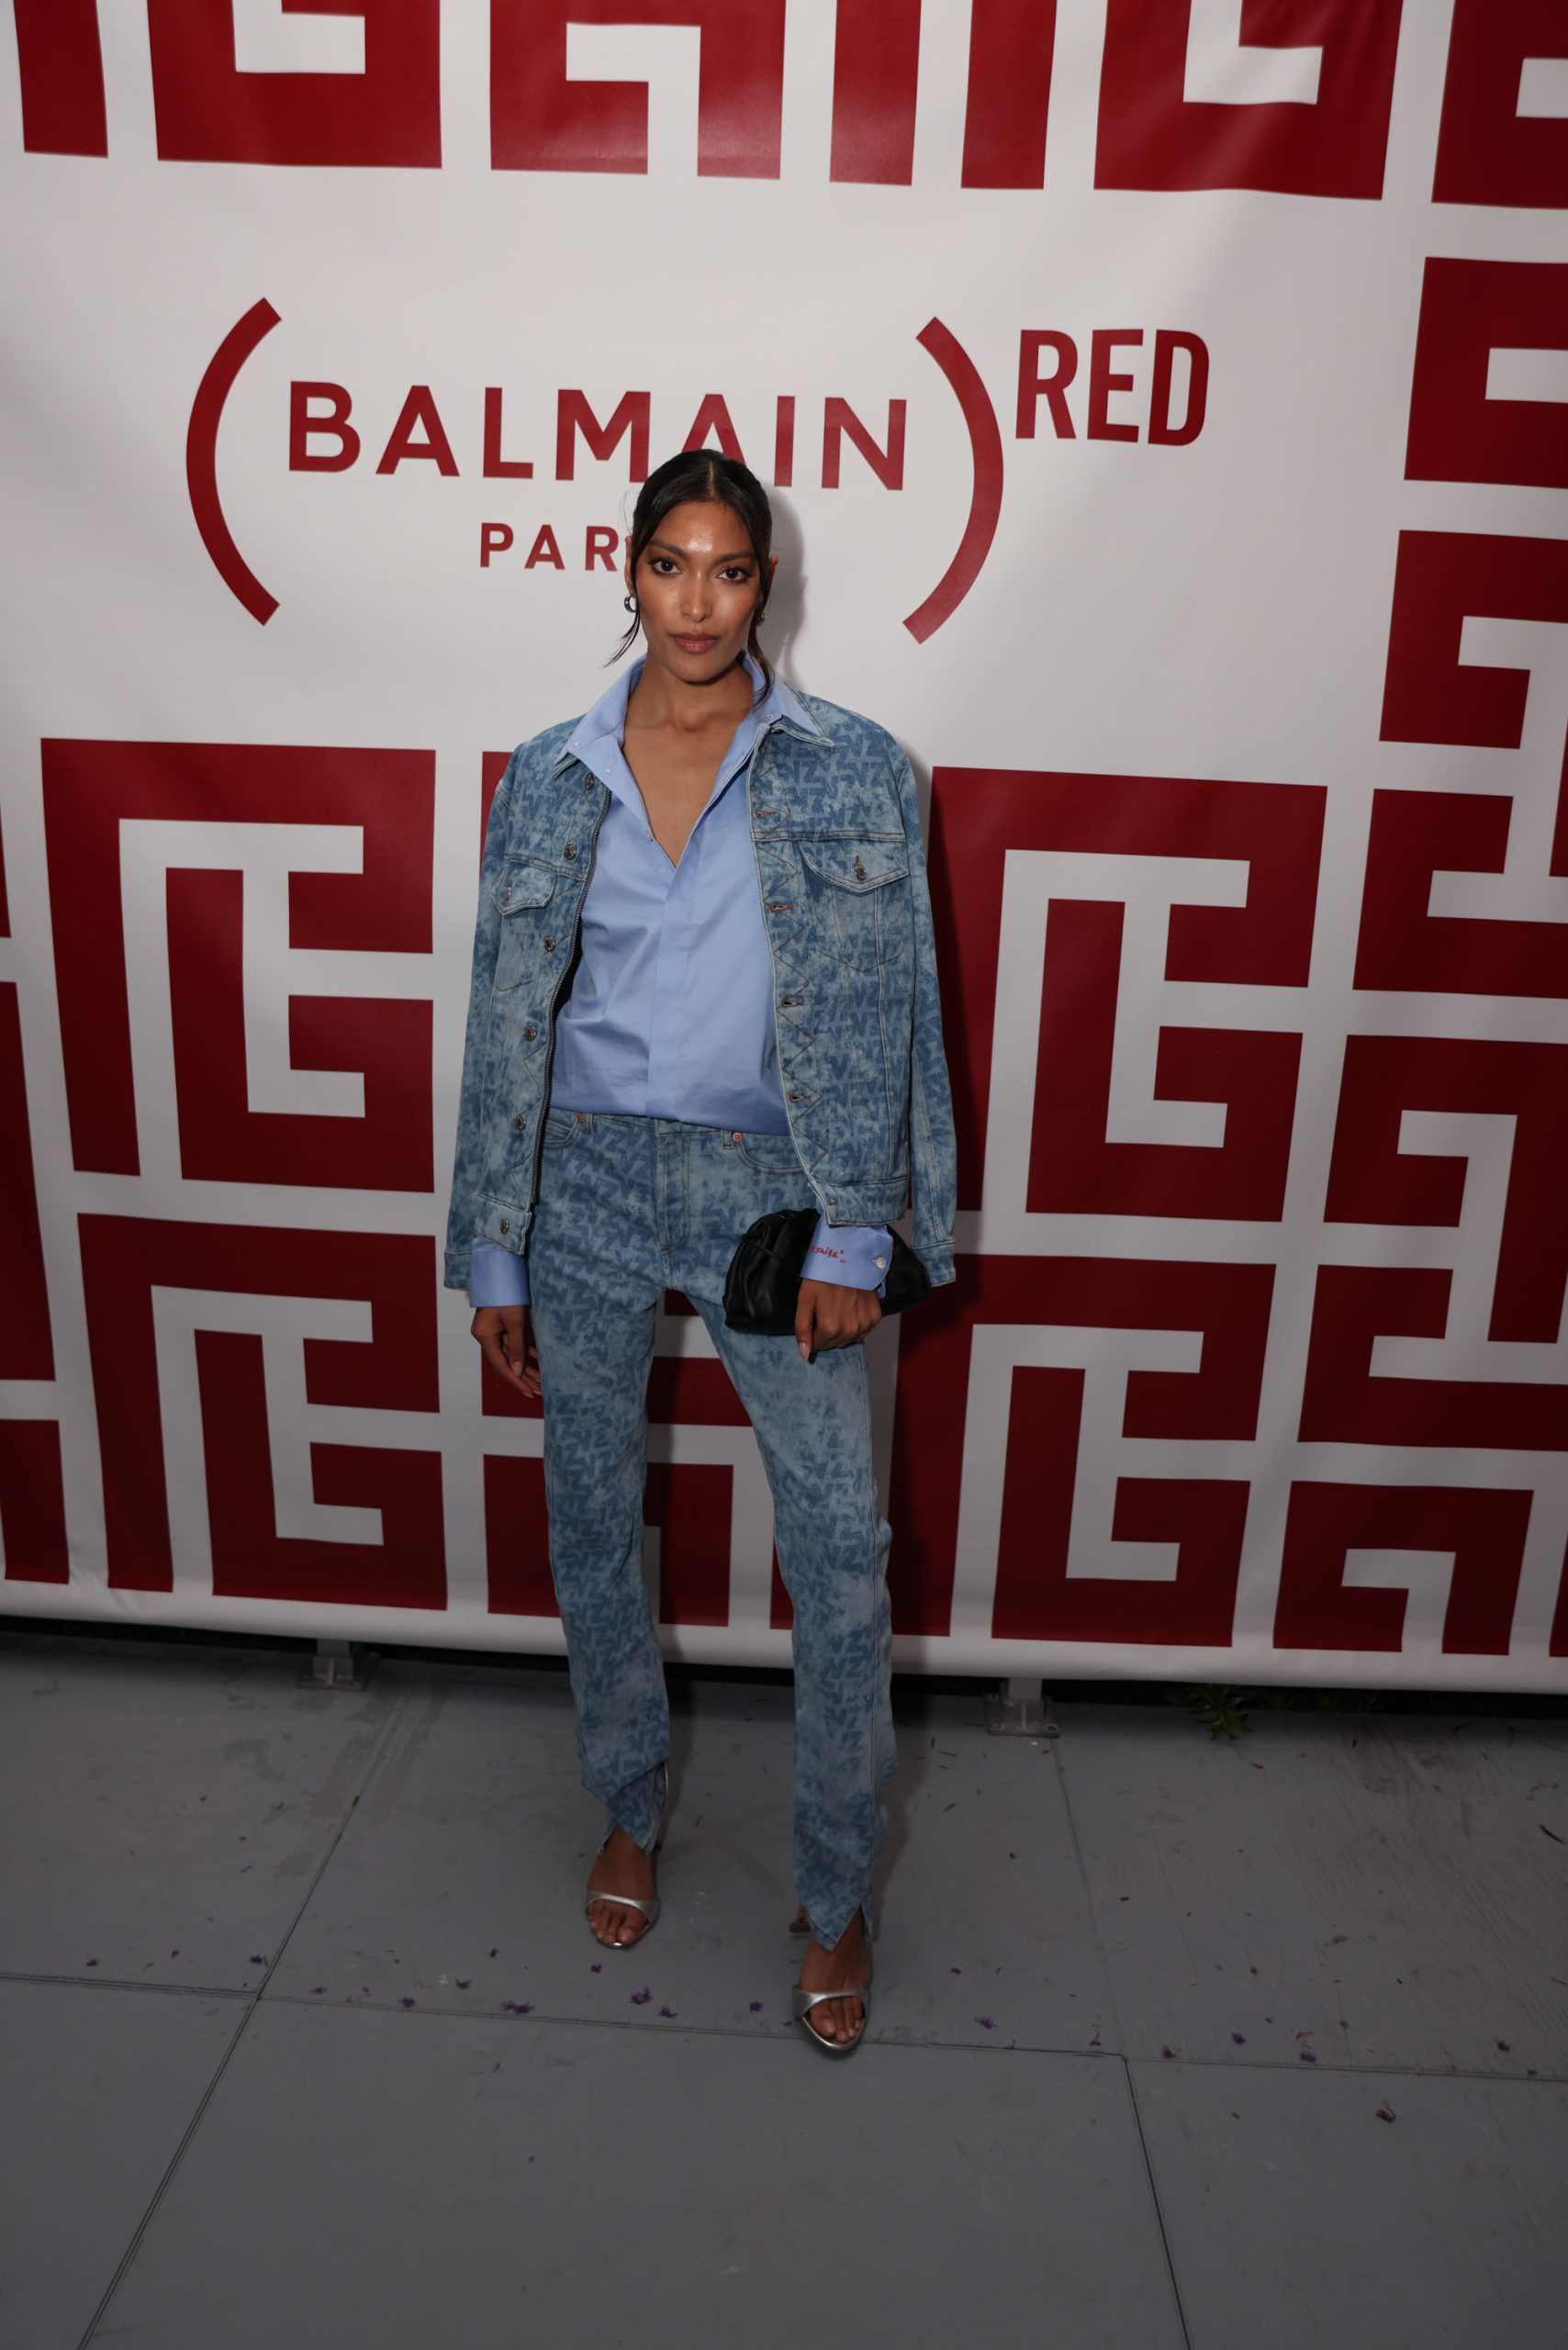 Balmain Joins with Red and Live Nation for a Special Miami Art Week Event